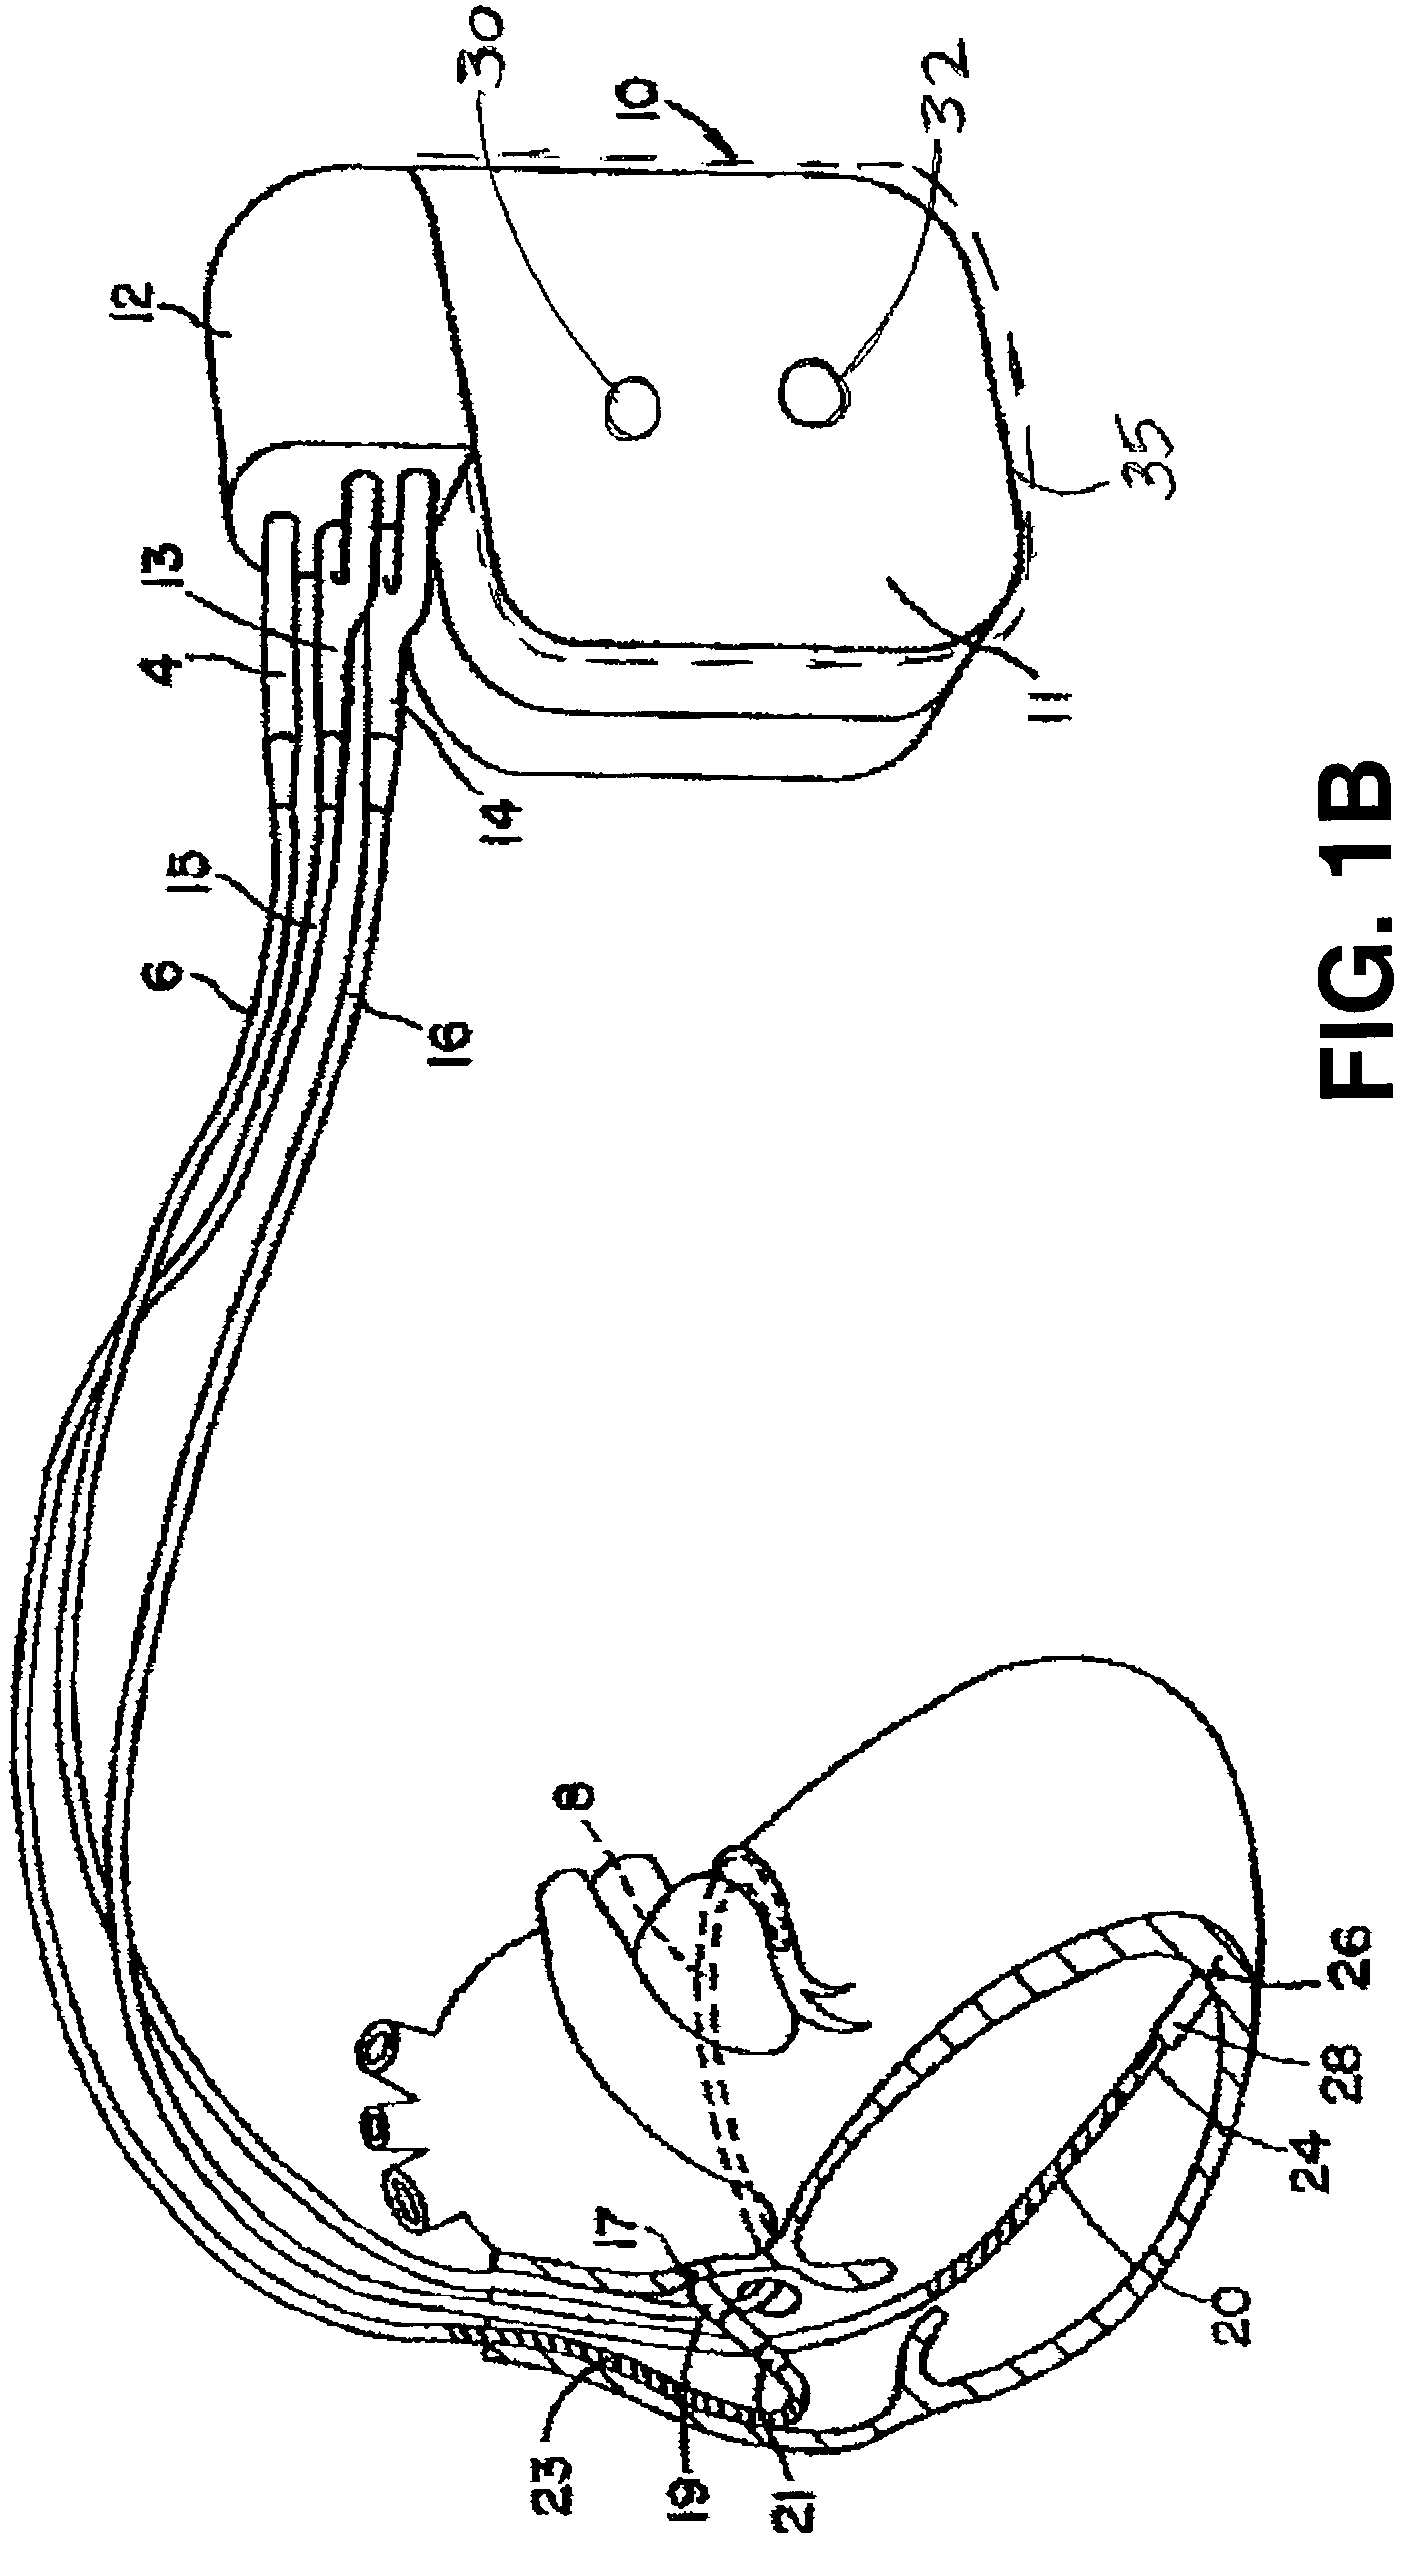 Method for elimination of ventricular pro-arrhythmic effect caused by atrial therapy